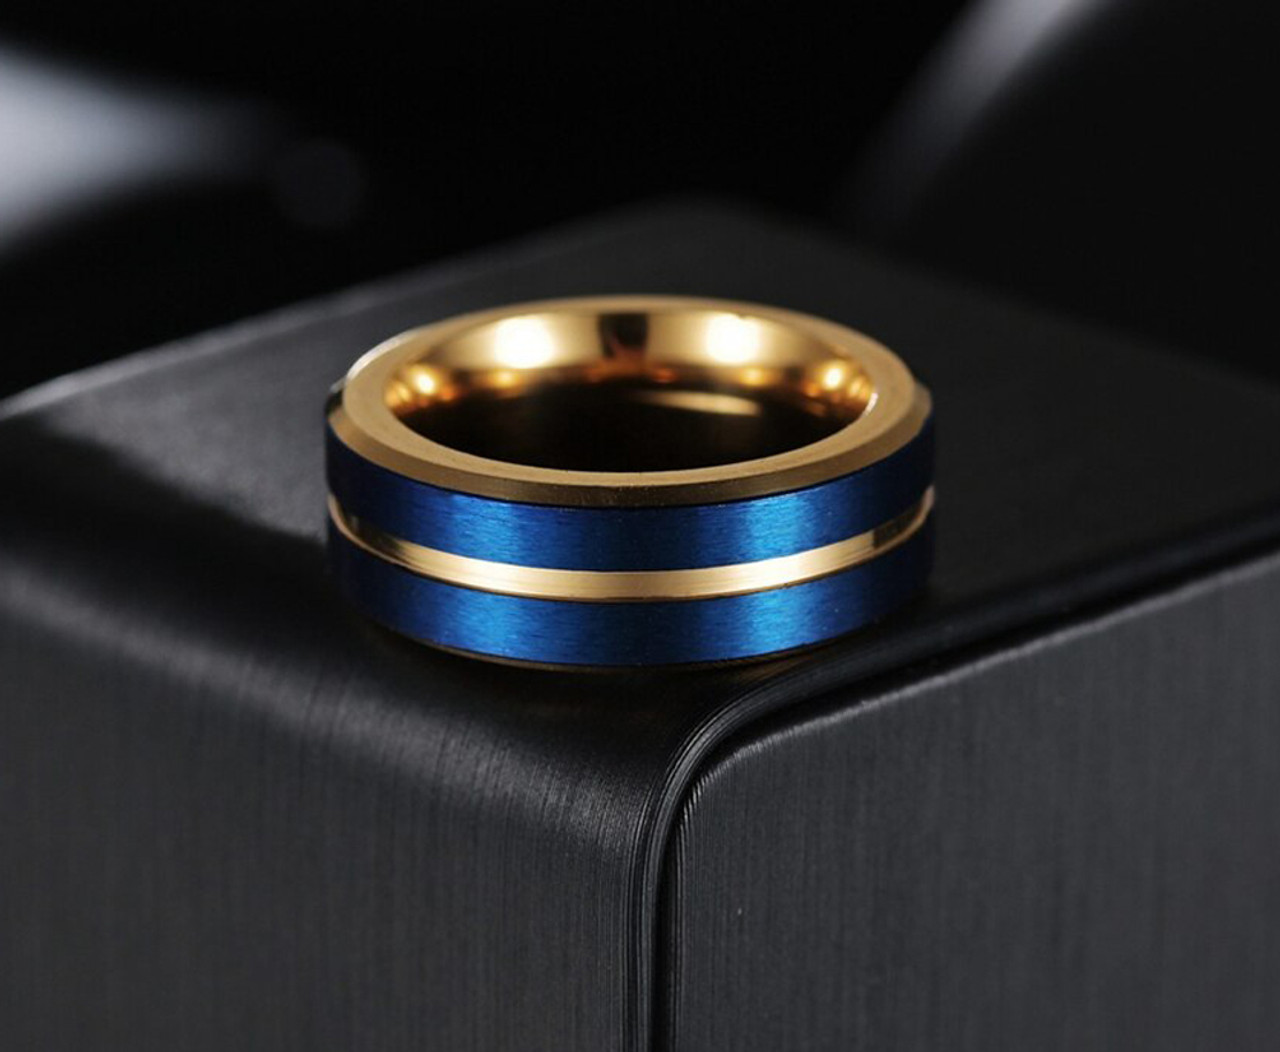 (8mm) Unisex or Men's Steel Wedding Ring Band. Matte Finish Blue Band with Yellow Gold Groove. High Polish Inside Gold Tone.